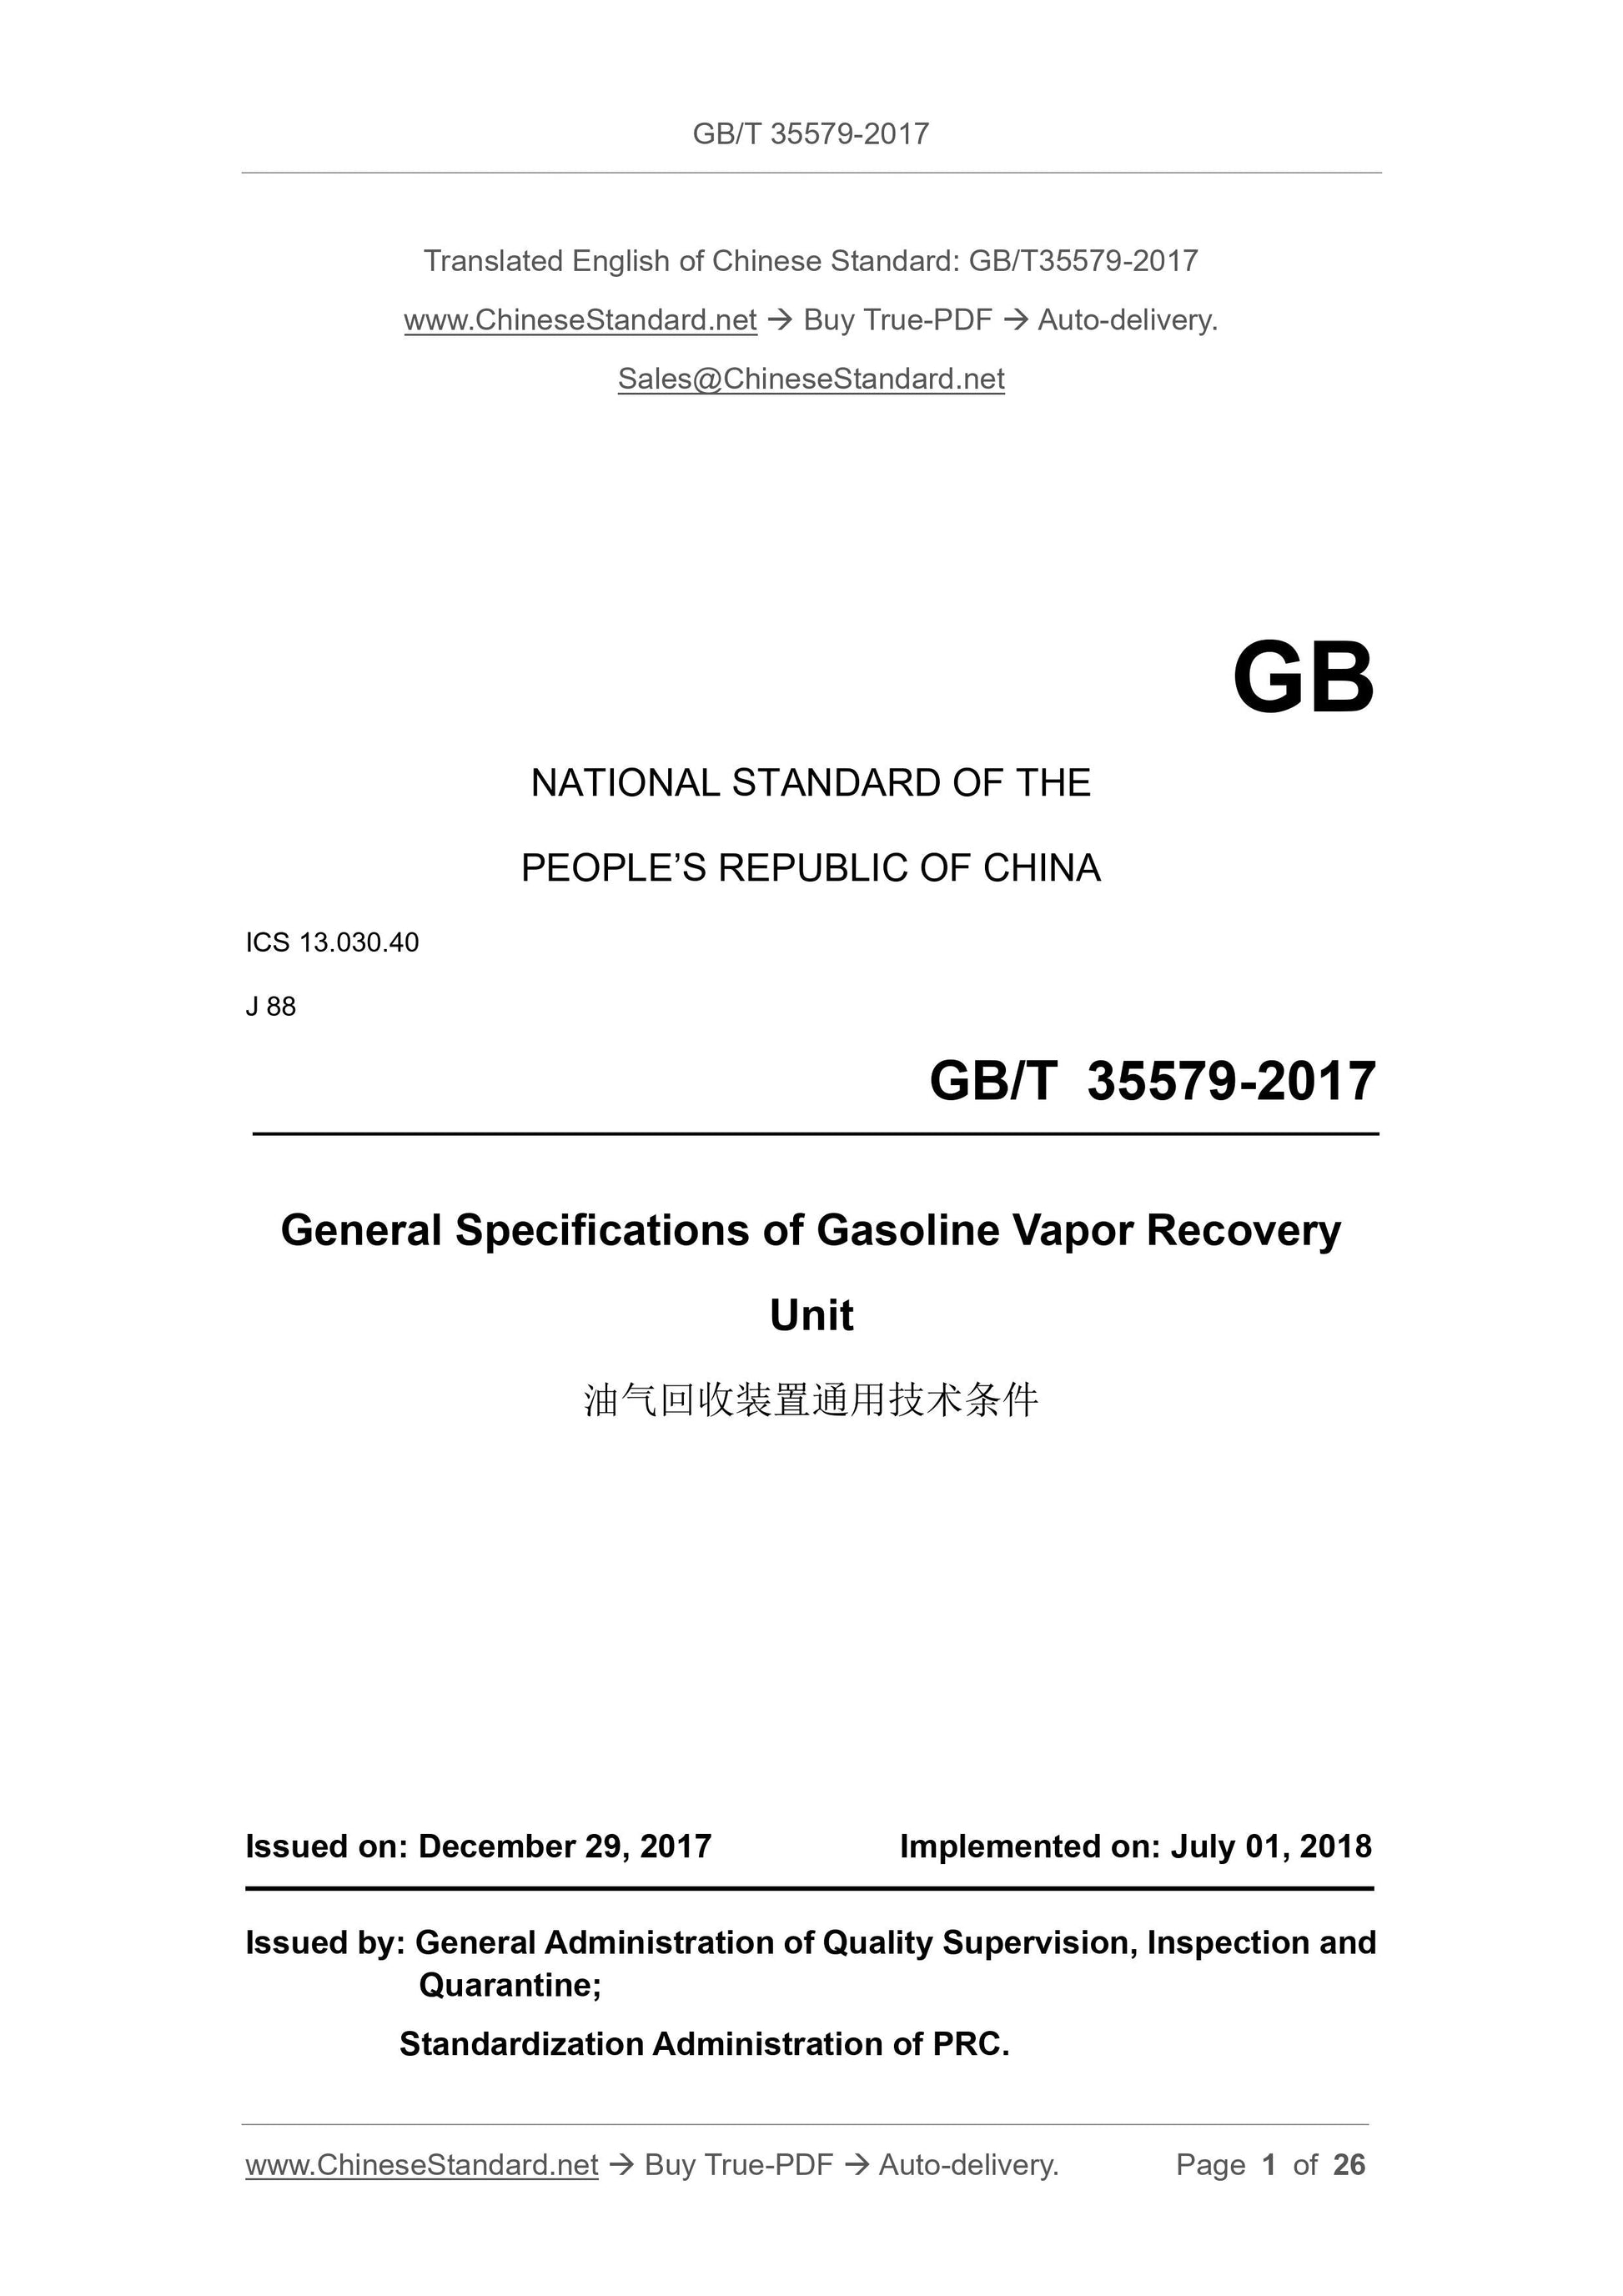 GB/T 35579-2017 Page 1